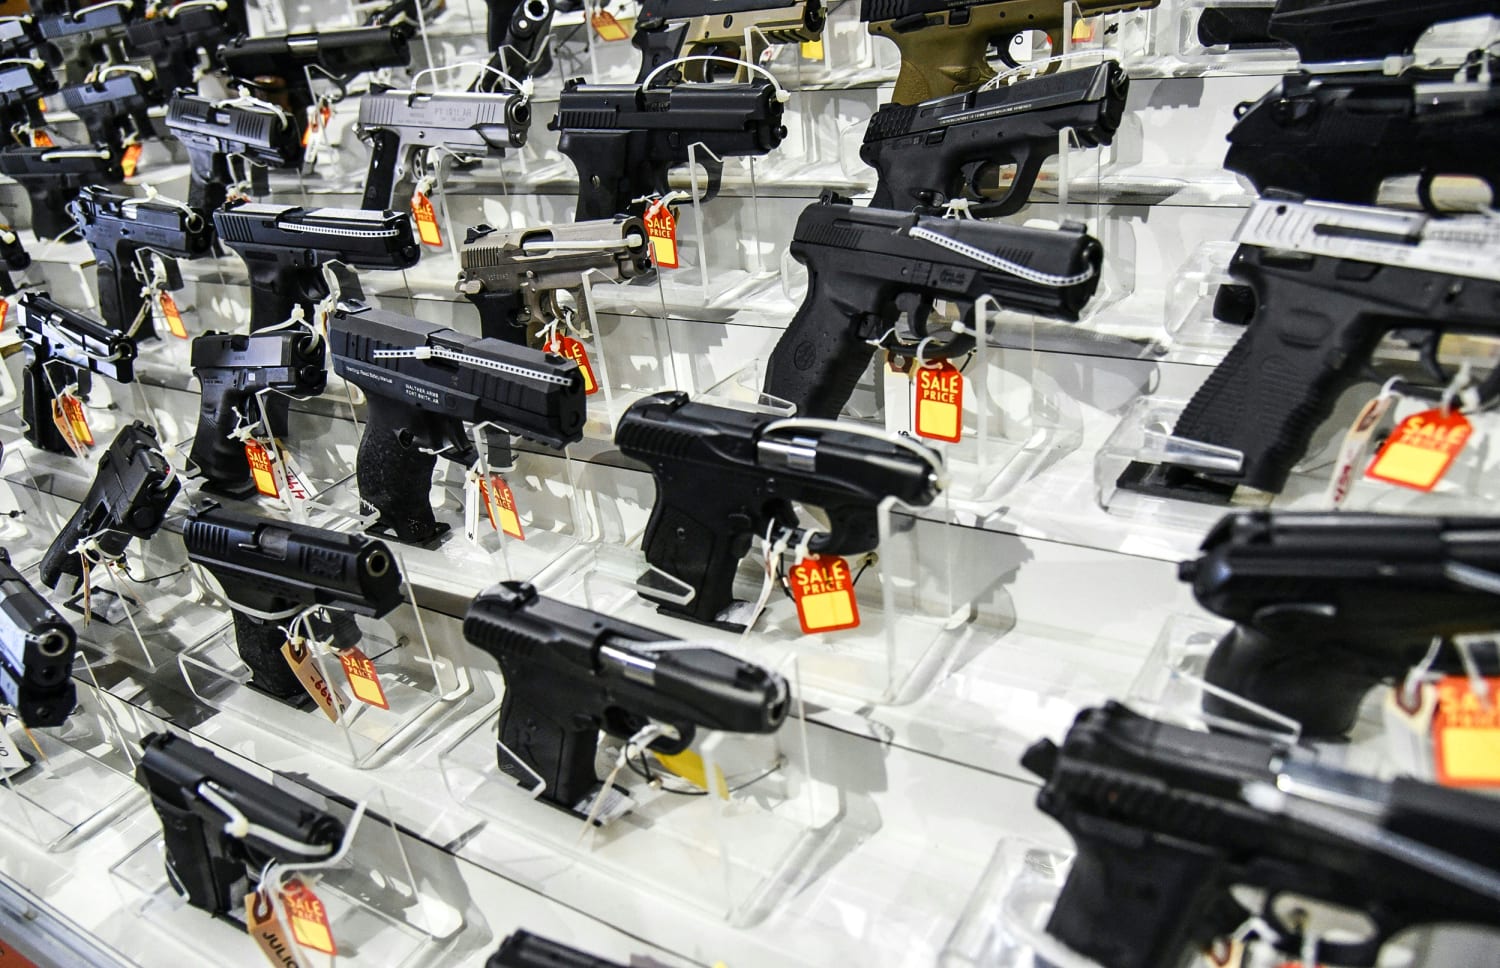 Appeals court rules people convicted of nonviolent crimes can own guns